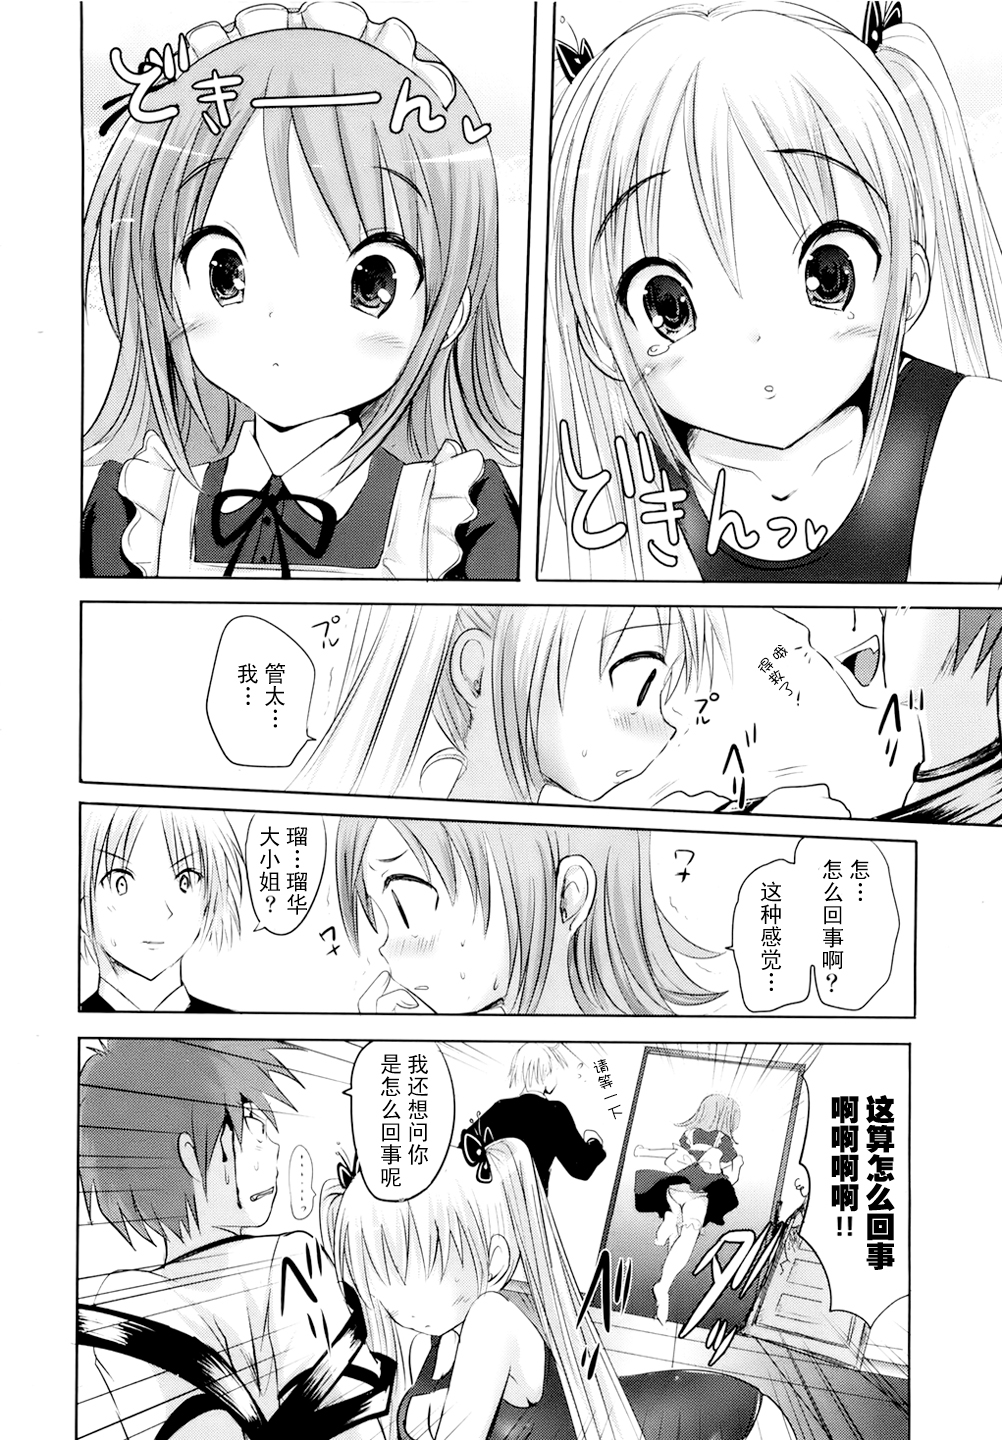 [Natsume Fumika] Sundere! Ch.5 [Chinese] [夏目文花] スンデレ! CH5[中文翻譯]